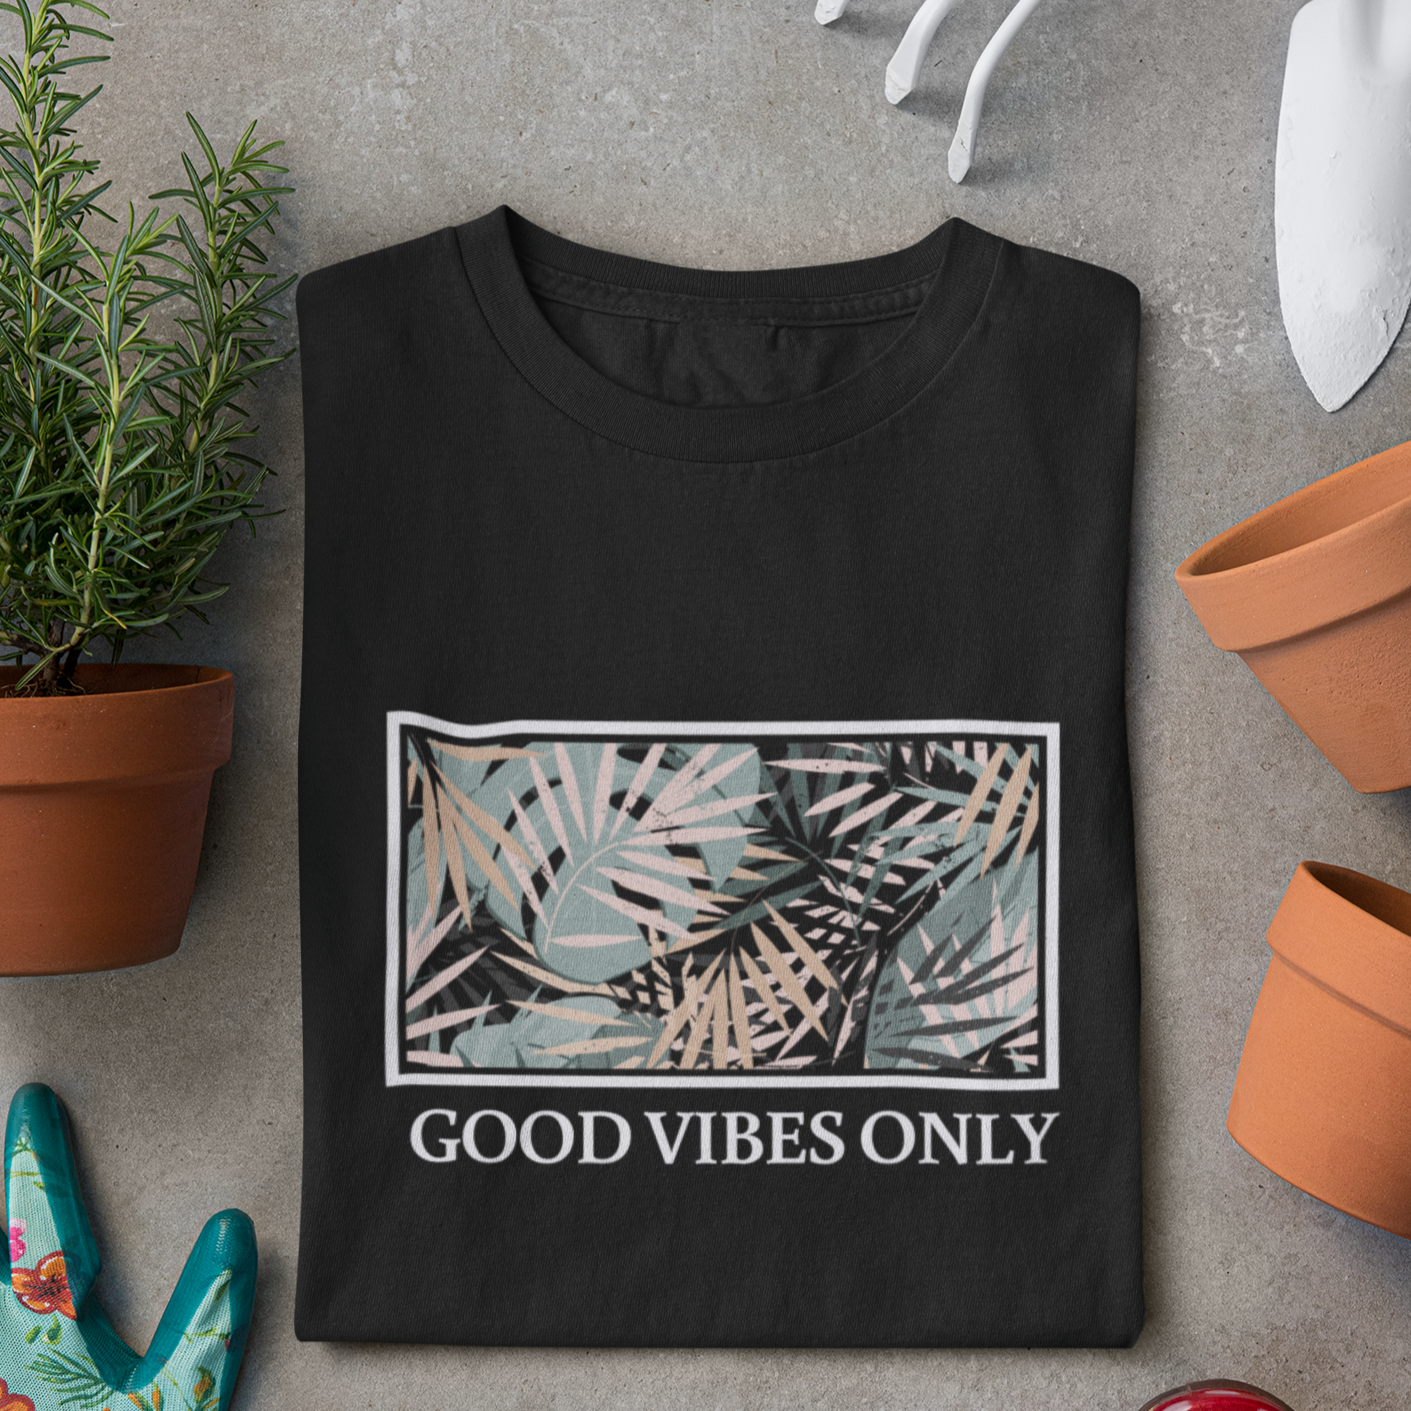 Story of Awakening Lifestyle Community Spirituality Relationships Love Light Meditation Oneness Earth Balance Healing Shop Store Charity Tree Nature Read Write T shirt Tops Tees Clothing Women Horoscope Organic Cotton Good Viibes Only Quote Gardening